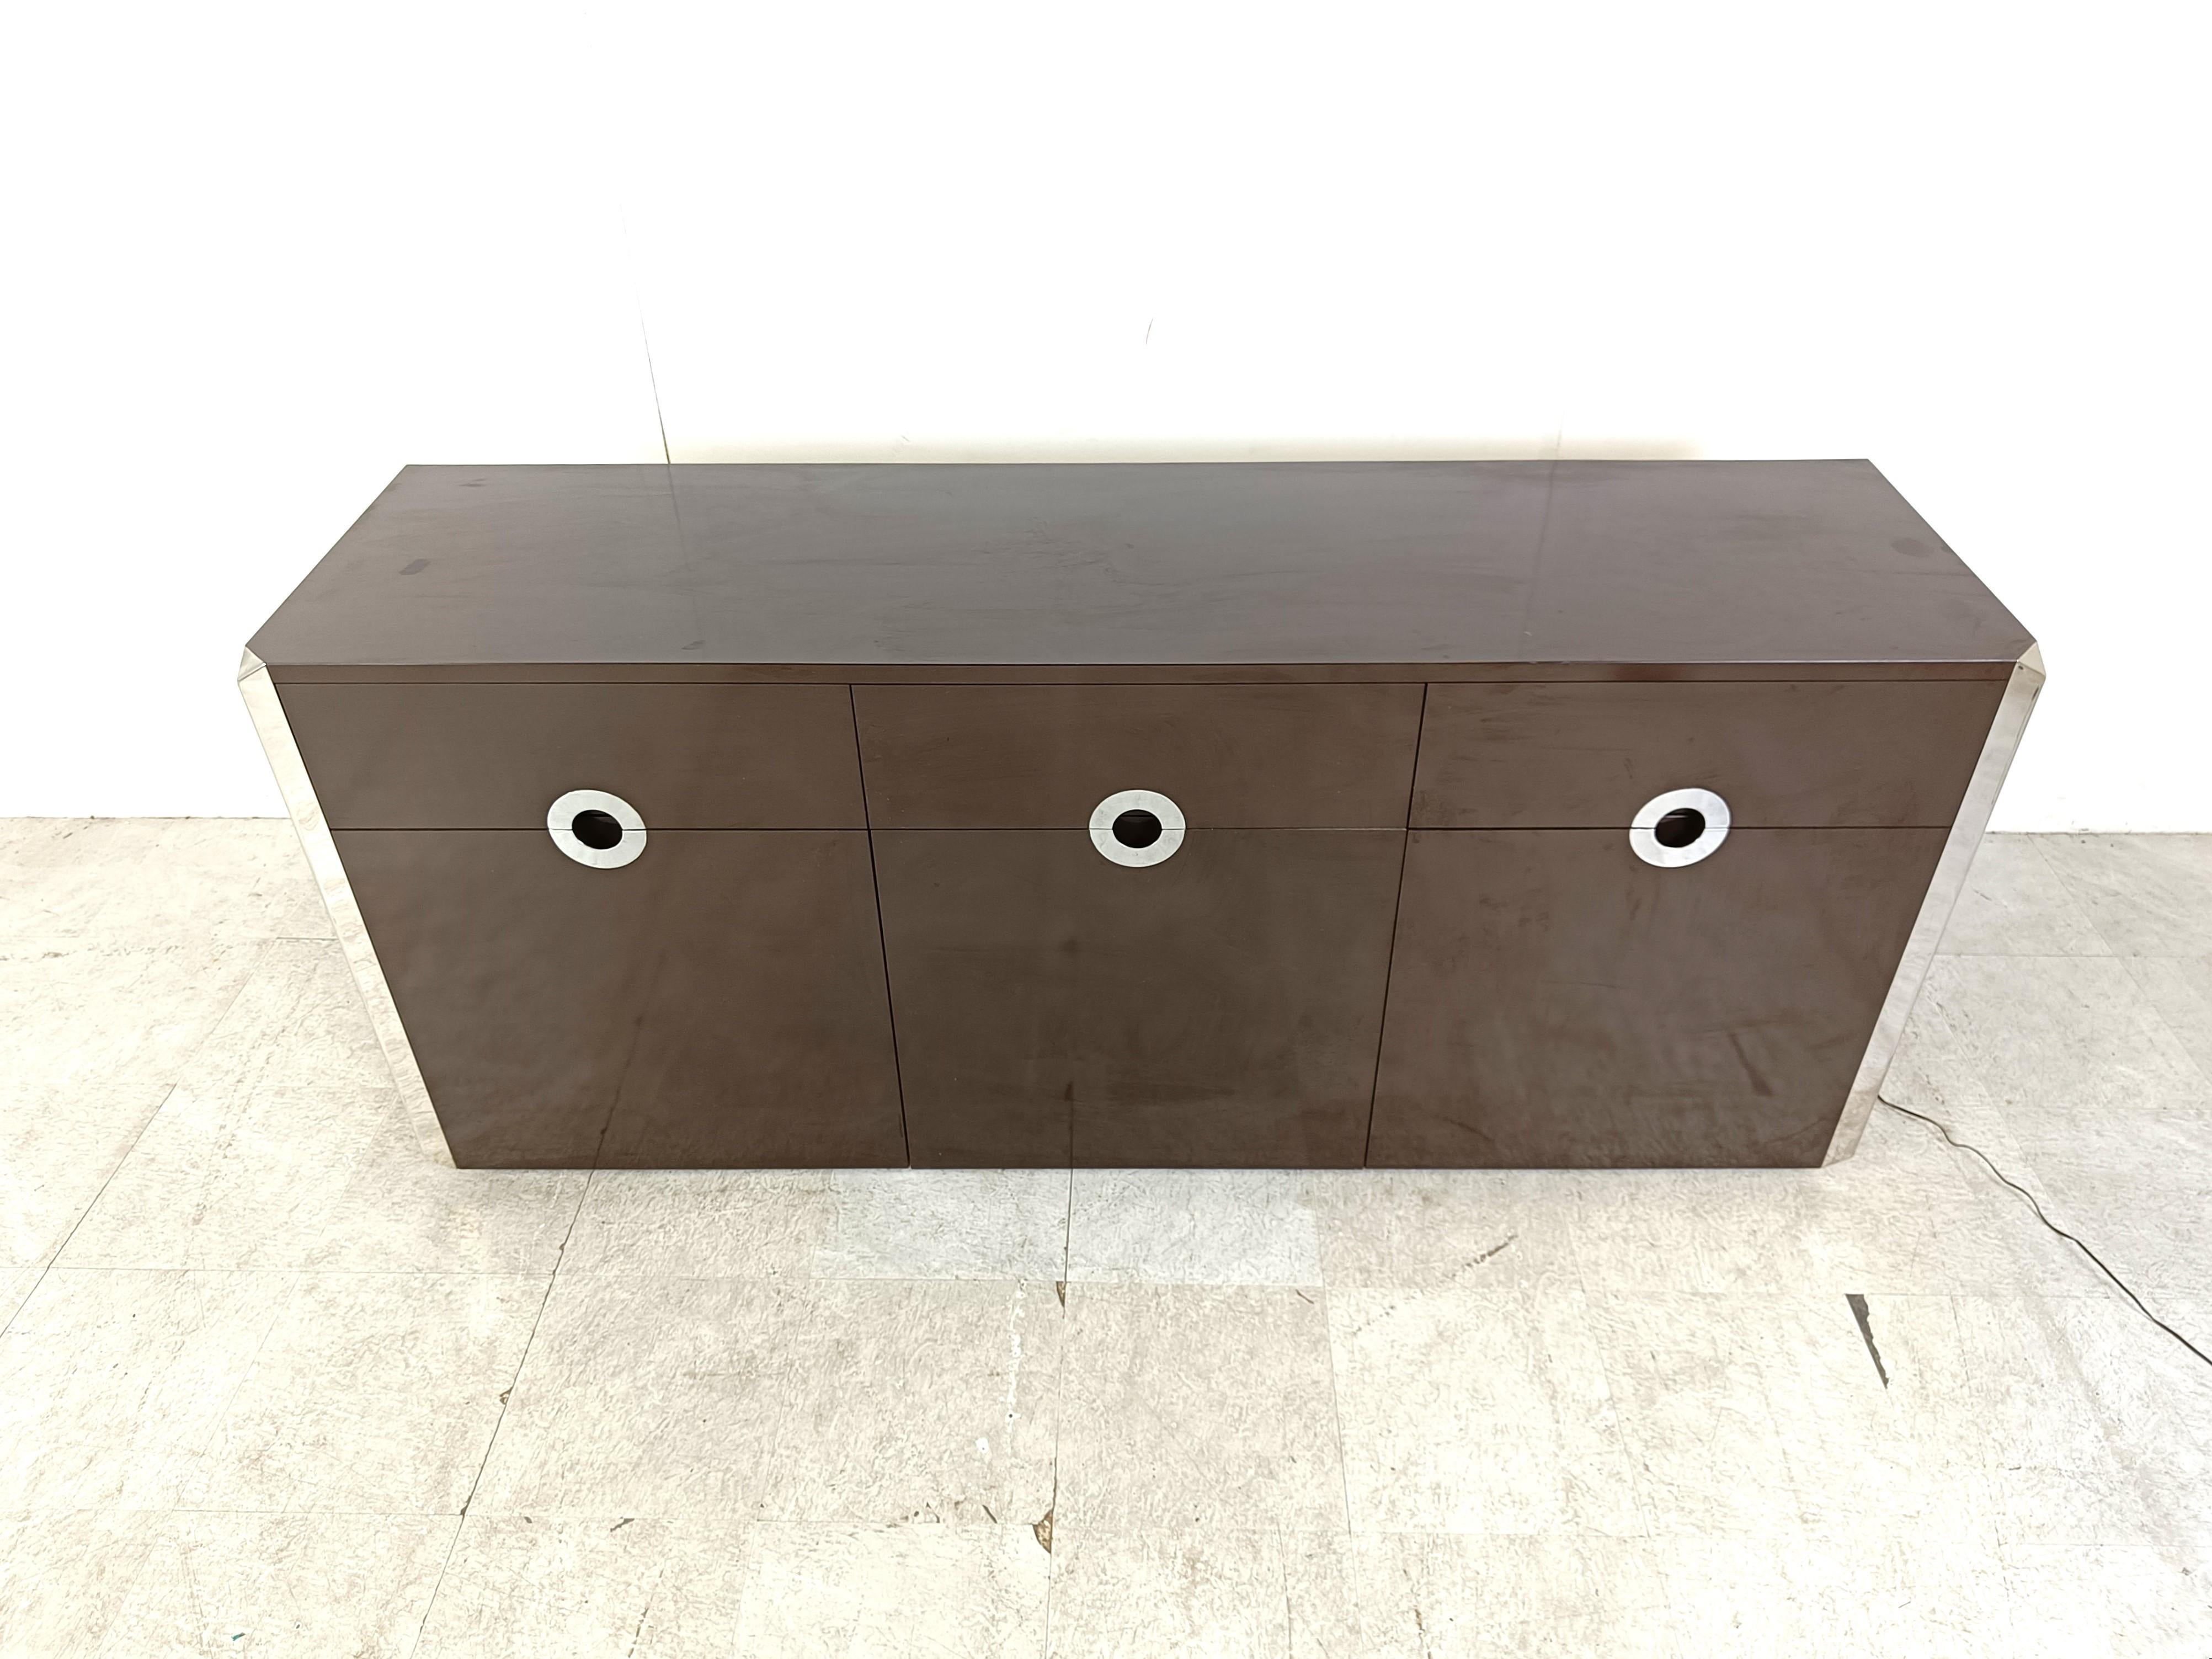 Brown lacquer sideboard with chrome handles and edges designed by Willy Rizzo for Cidue.

The sideboard has an illuminated bar compartment with a fold down door.

Good condition

1970s - Italy

Dimensions:
Lenght: 177cm/69.68